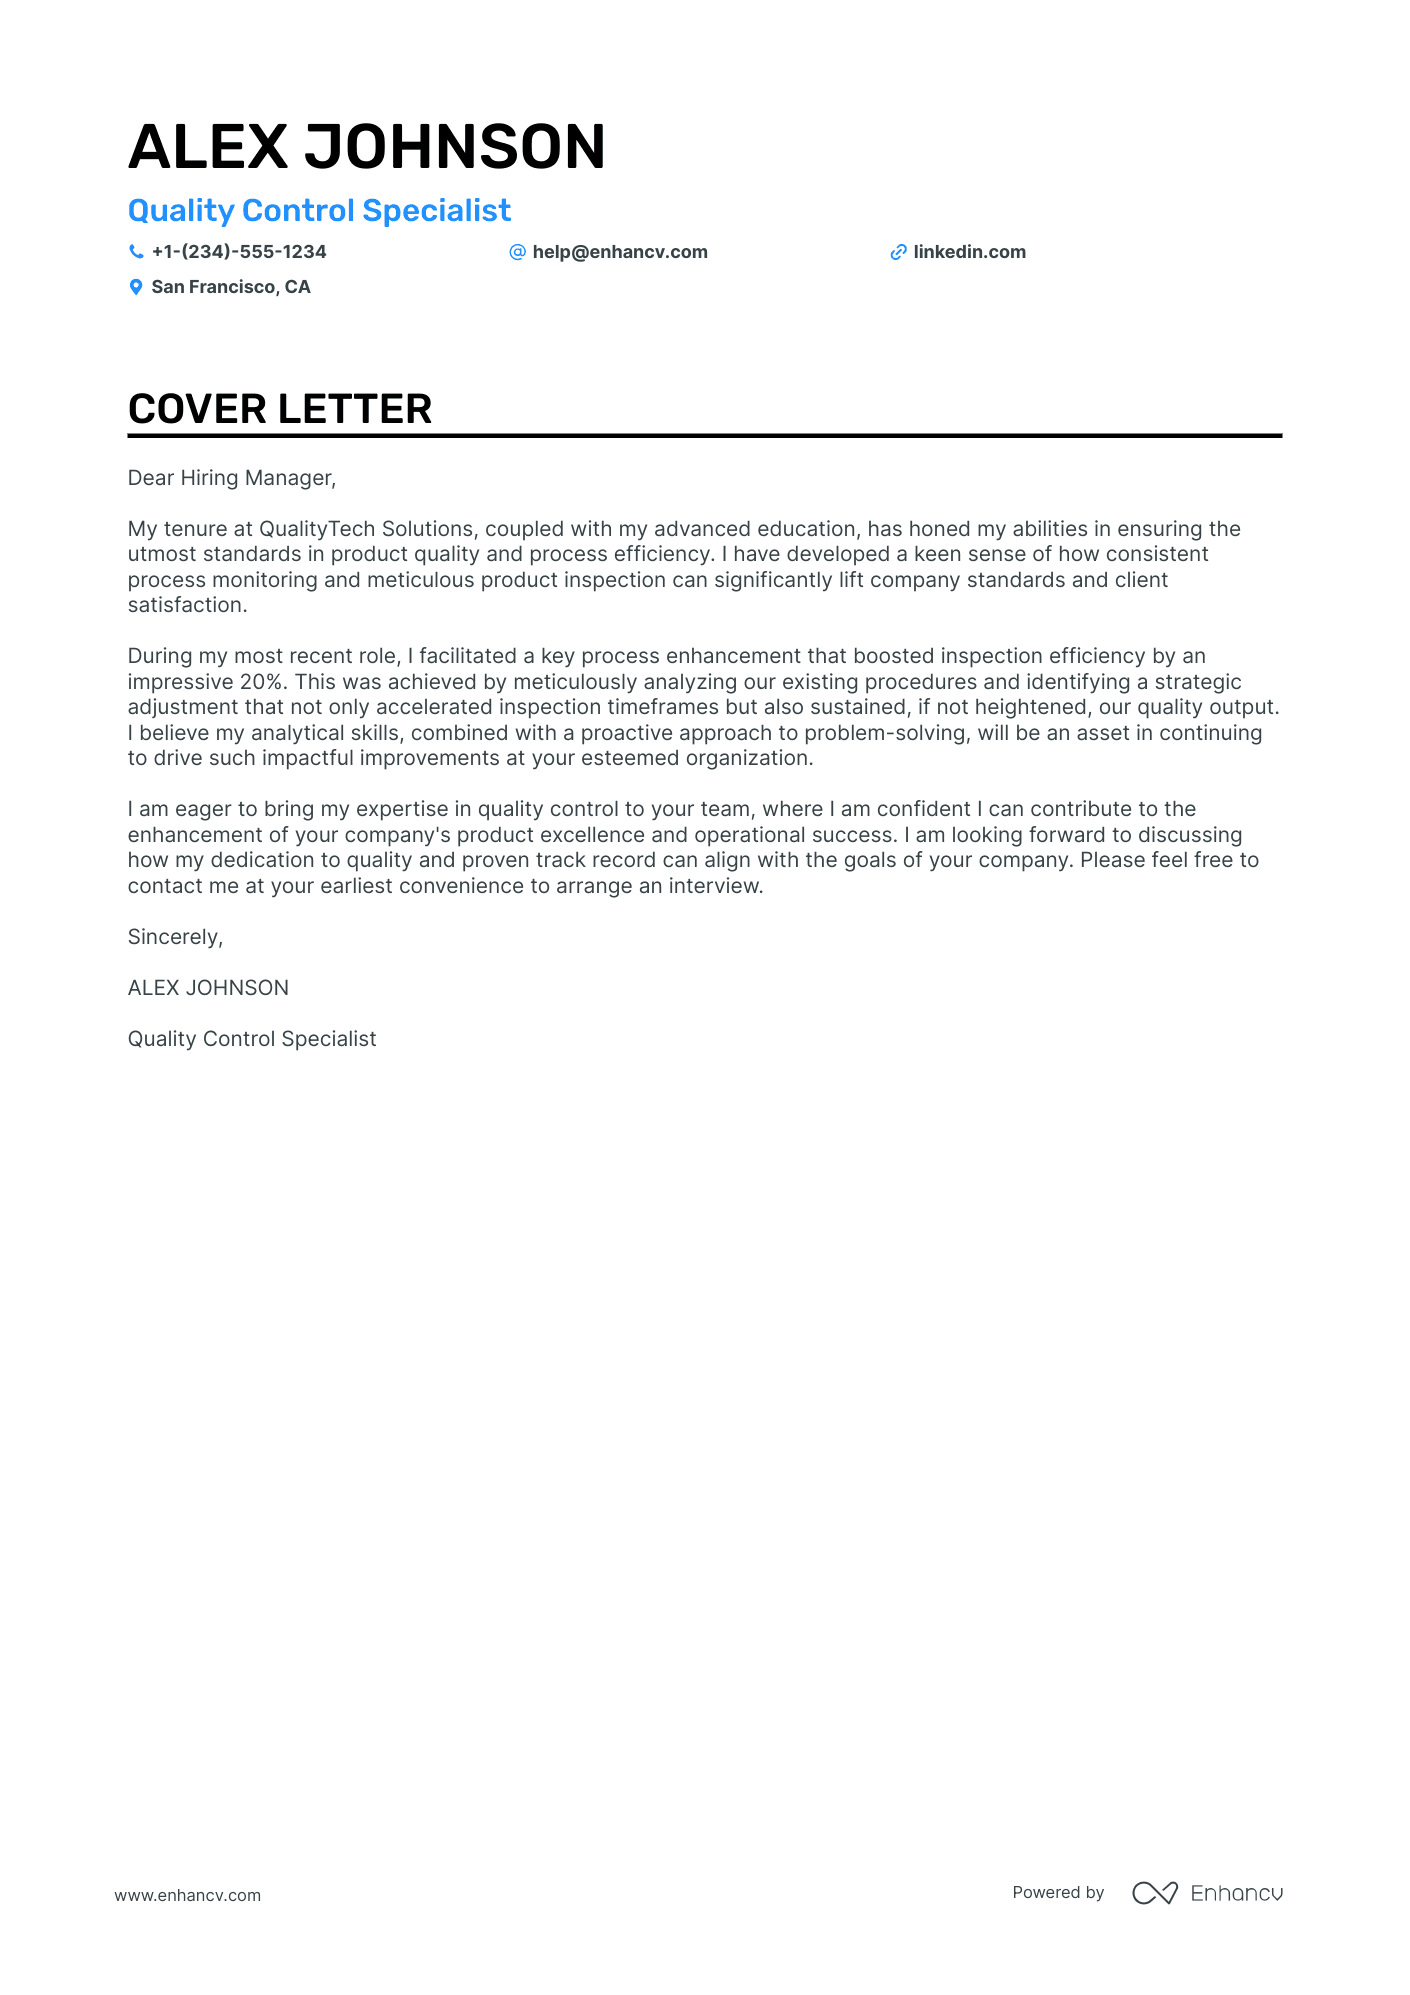 Quality Control cover letter